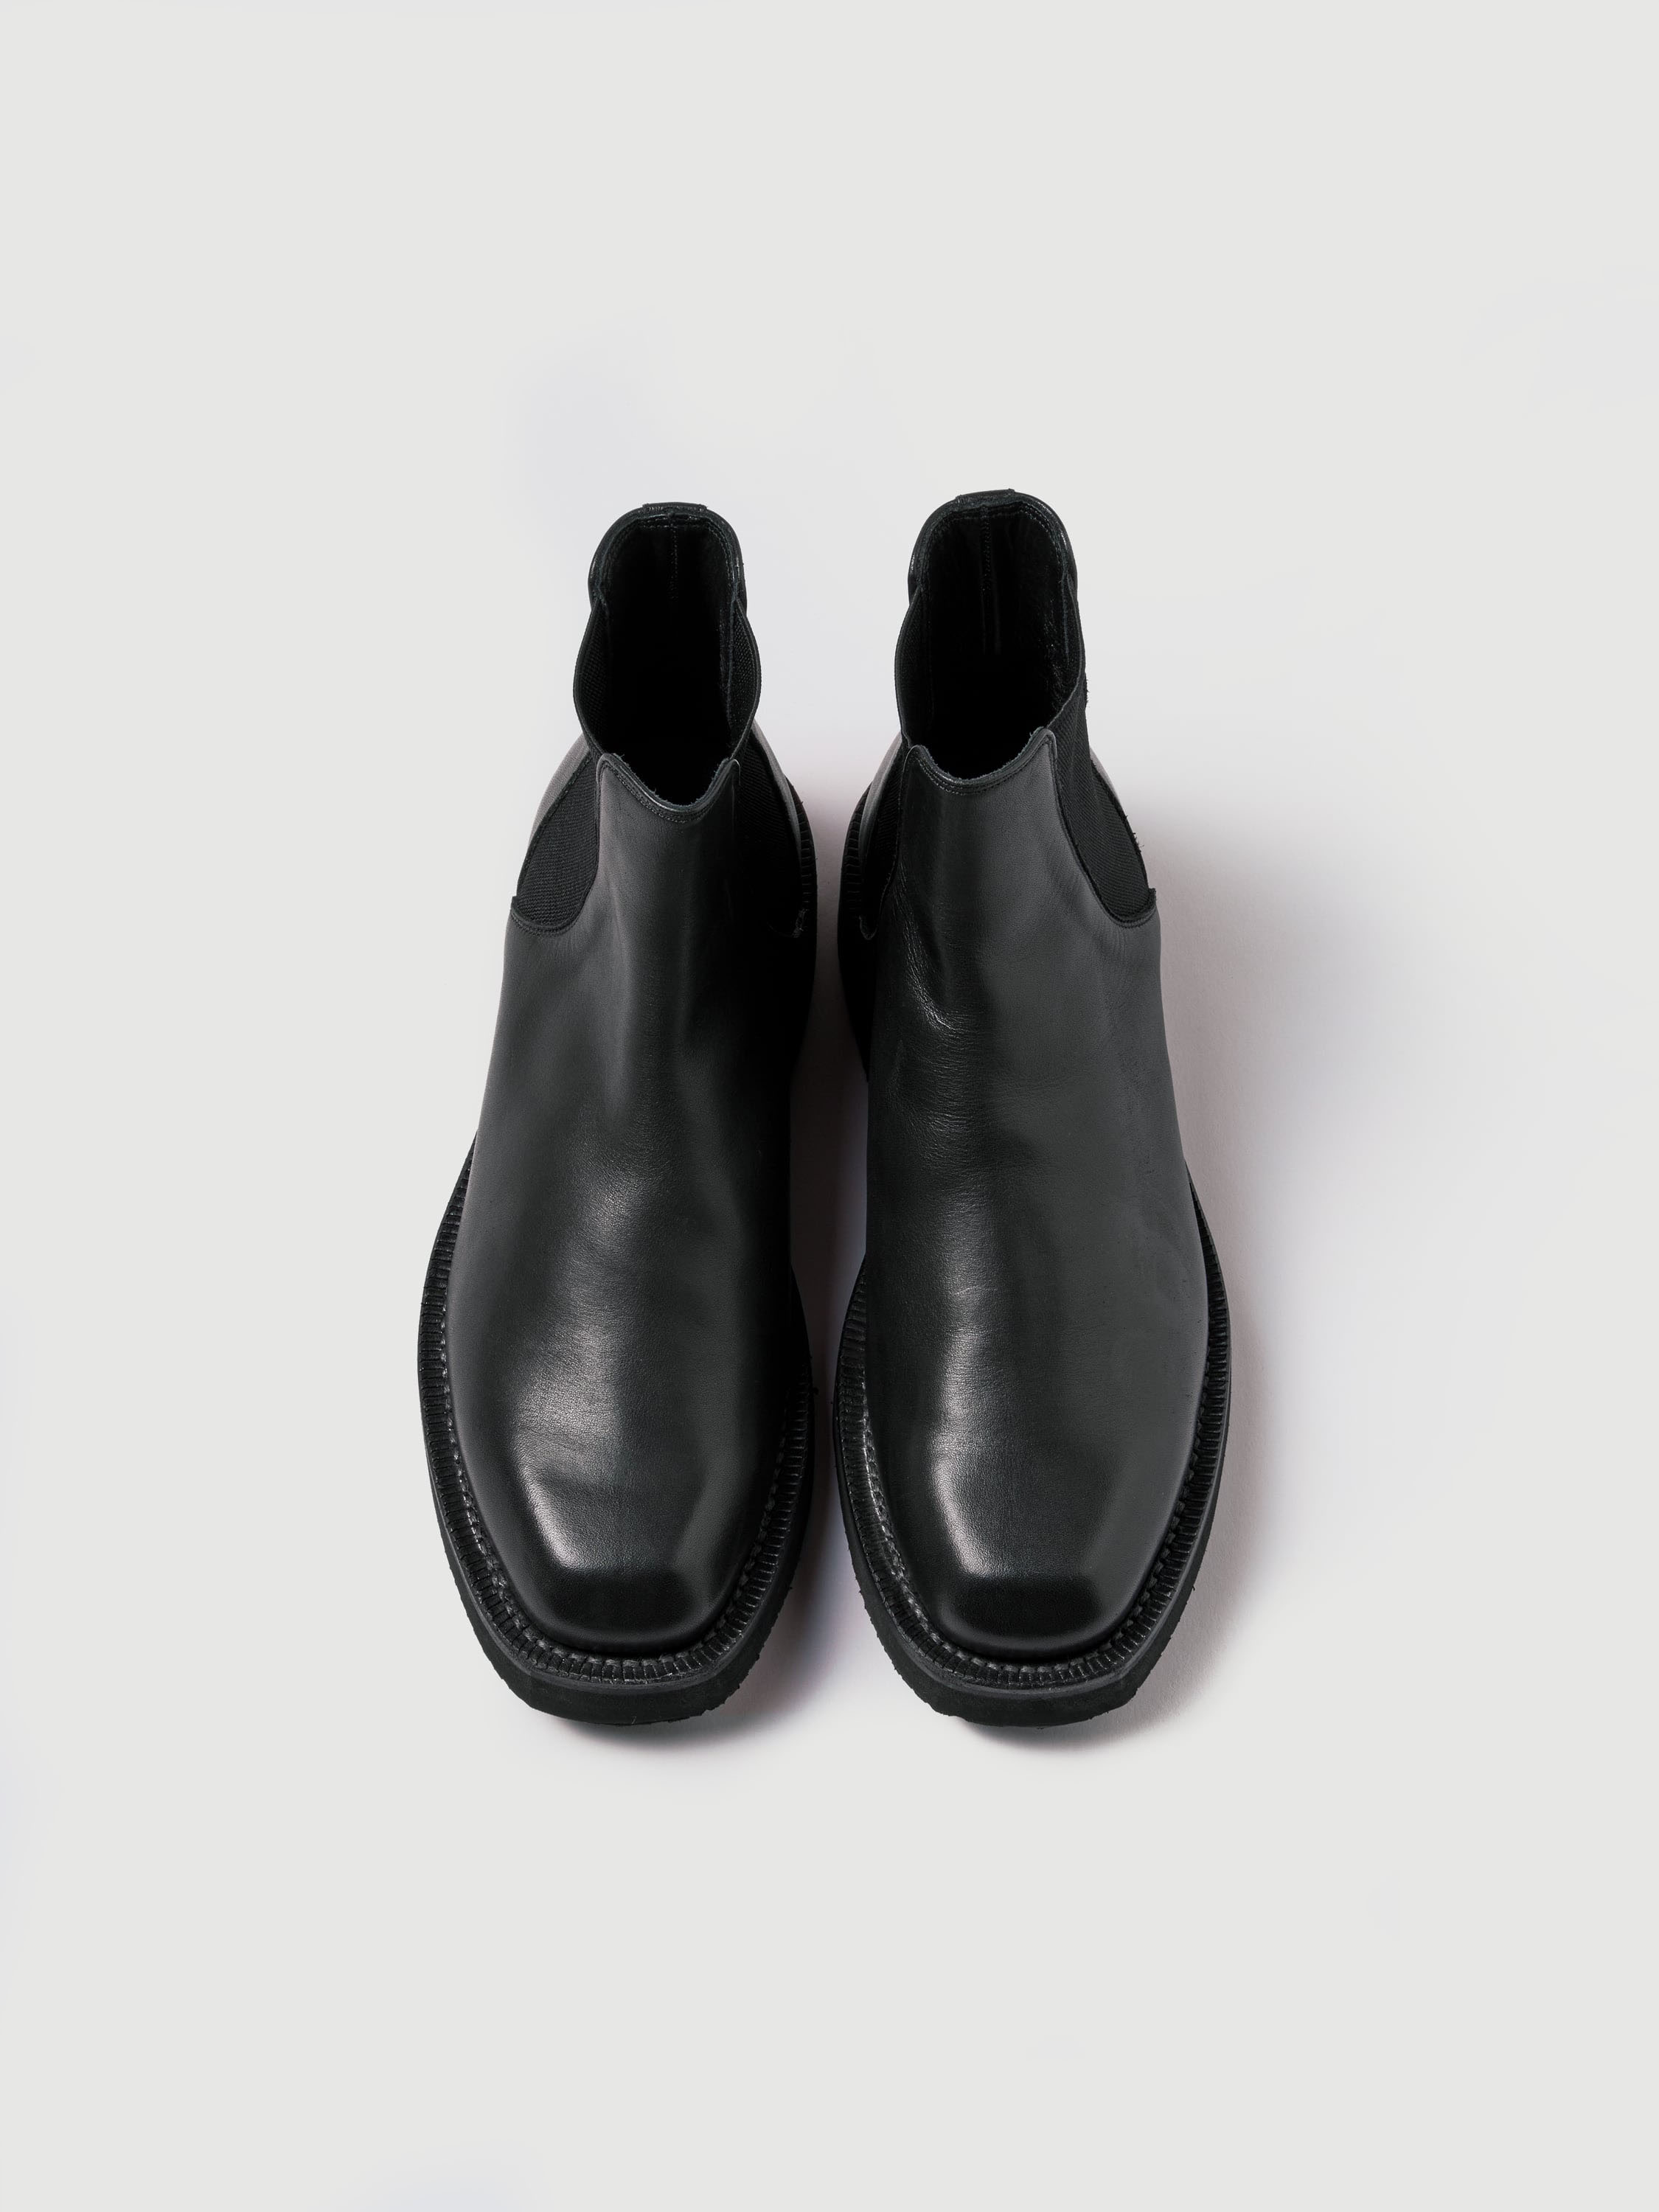 LEATHER SQUARE BOOTS MADE BY FOOT THE COACHER 詳細画像 BLACK 2